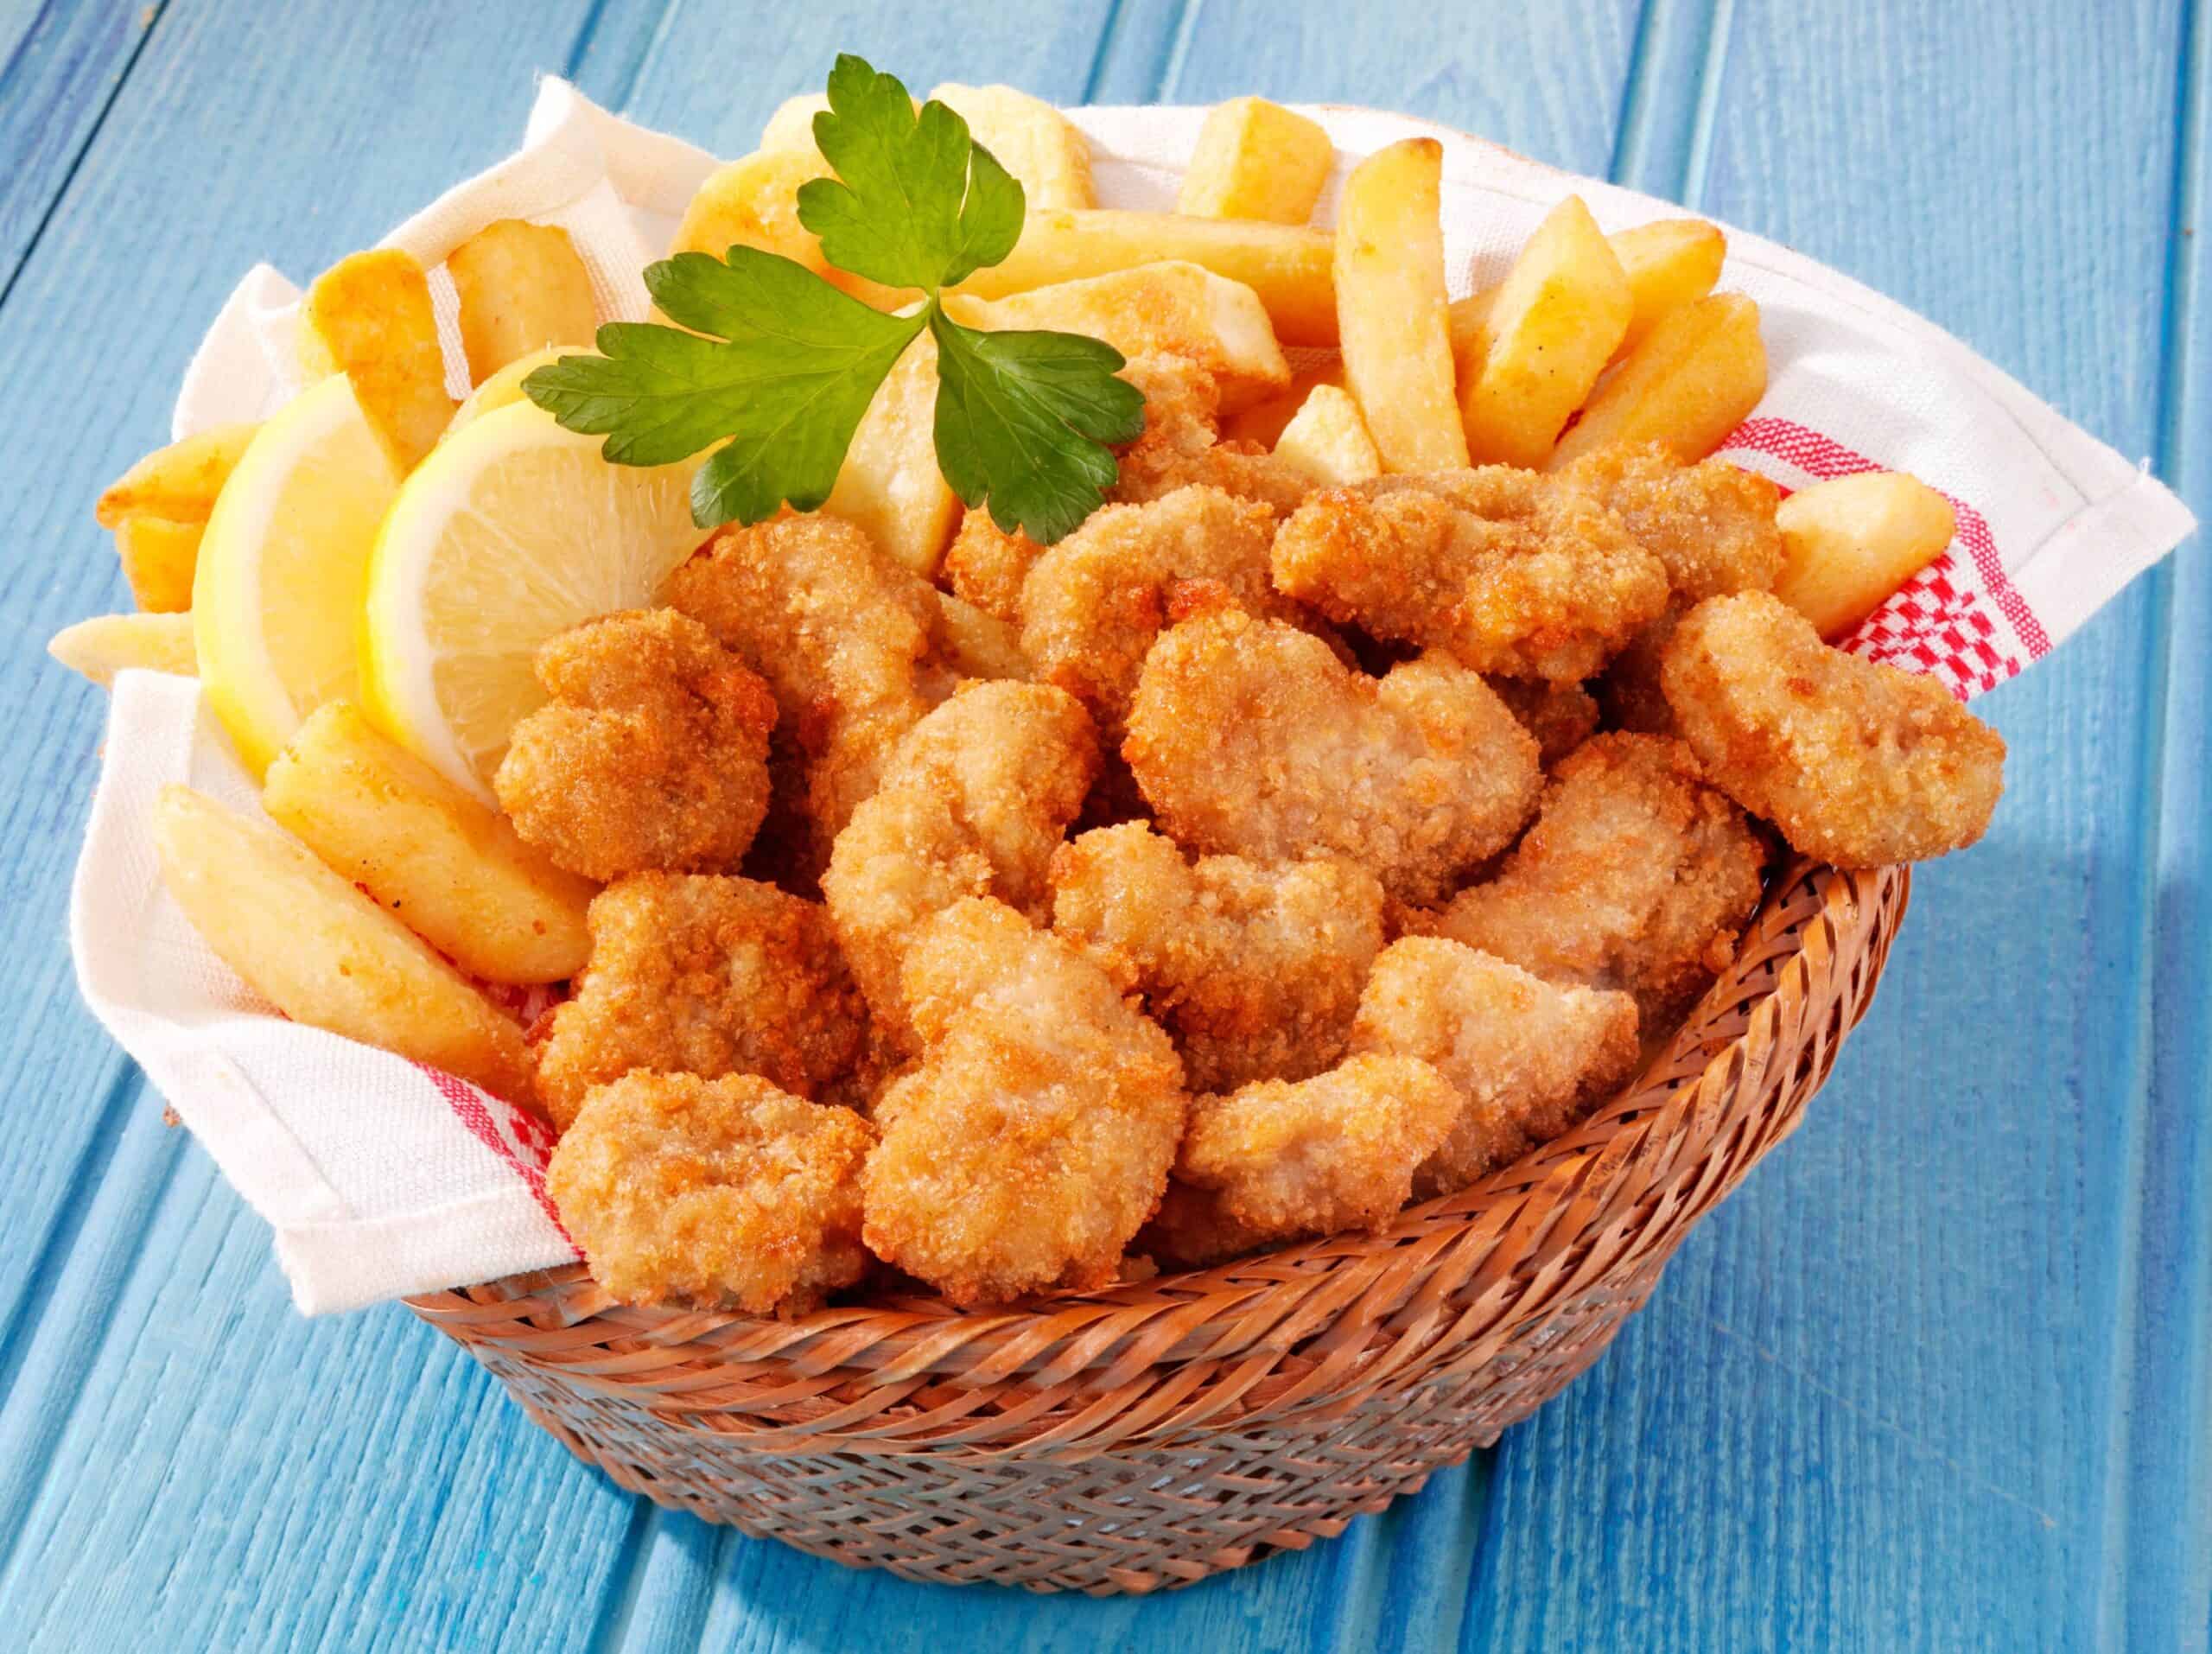 Avoid scampi to save the environment, shoppers told